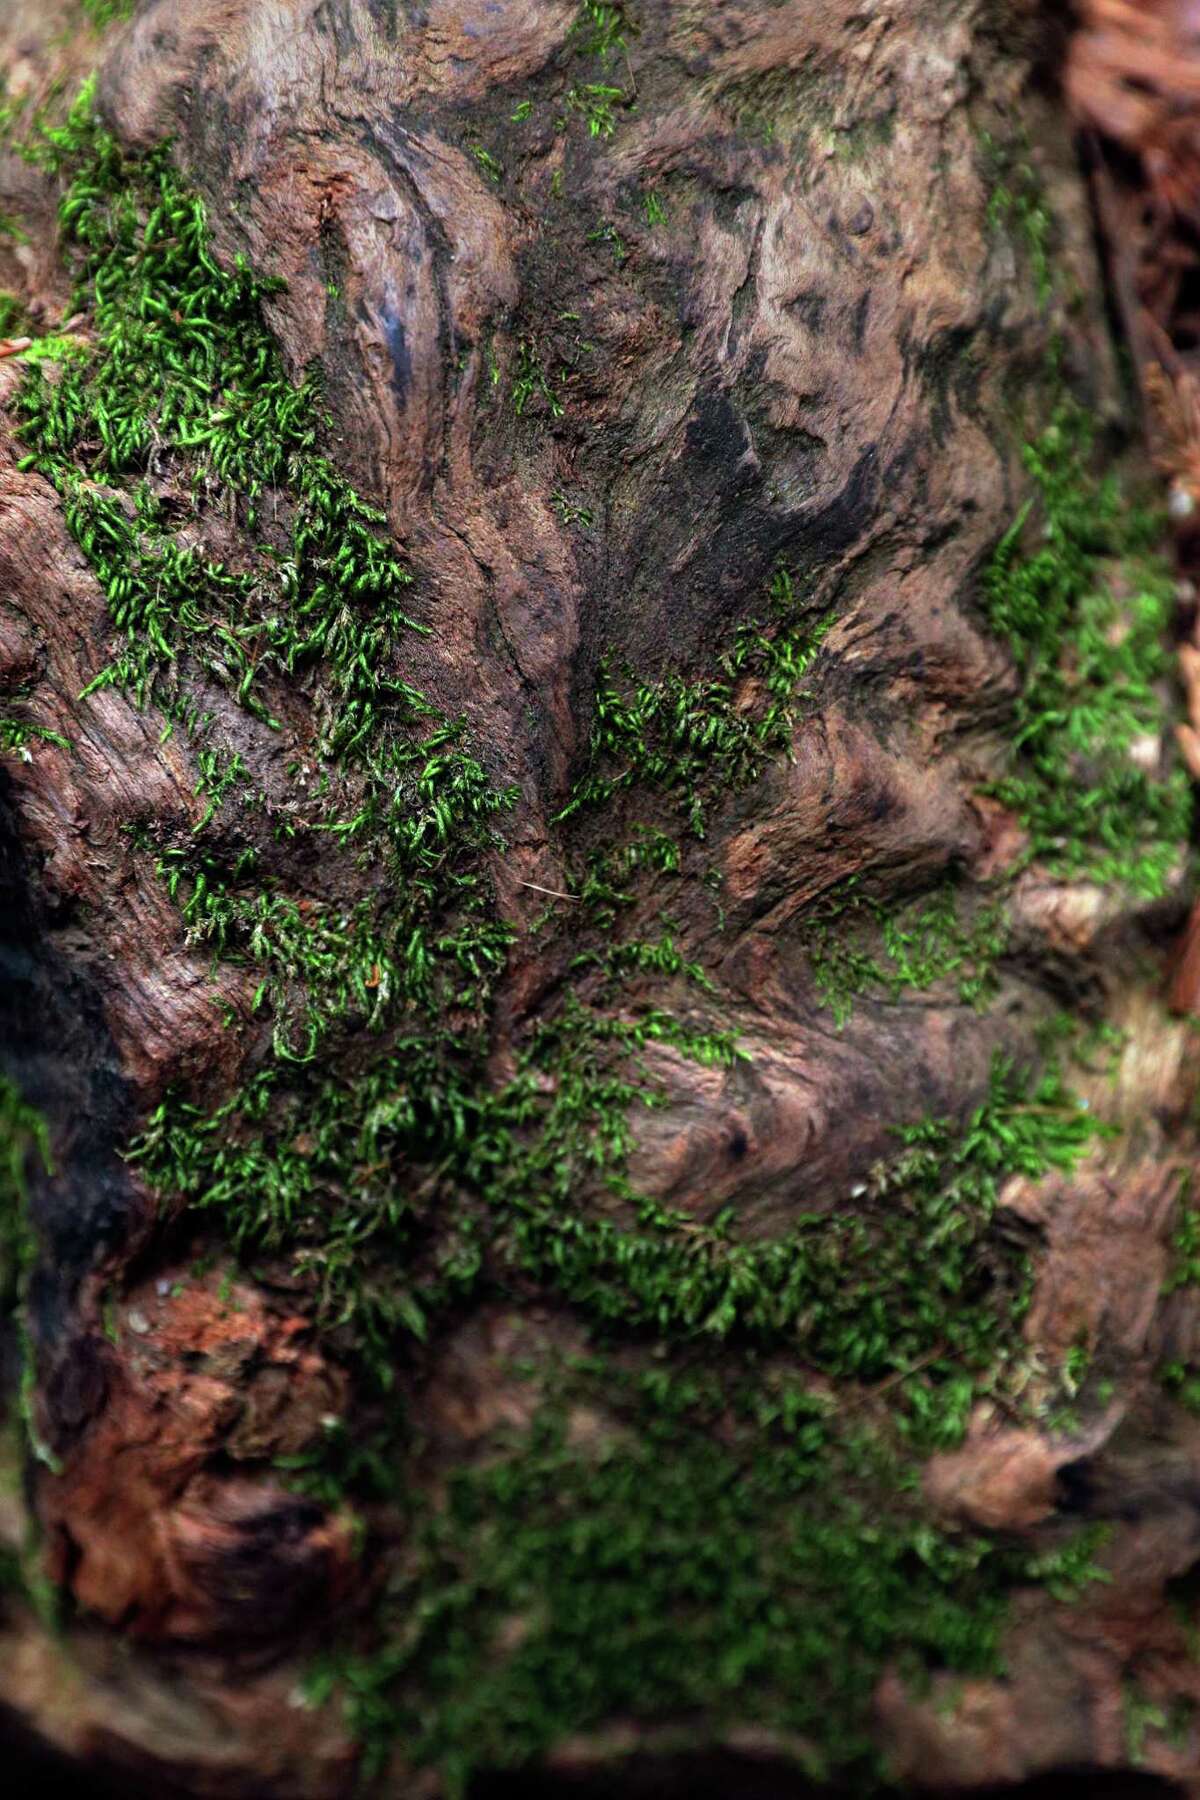 Moss growth on an old growth root burl in Joaquin Miller Park in Oakland, Calif., on April 29.